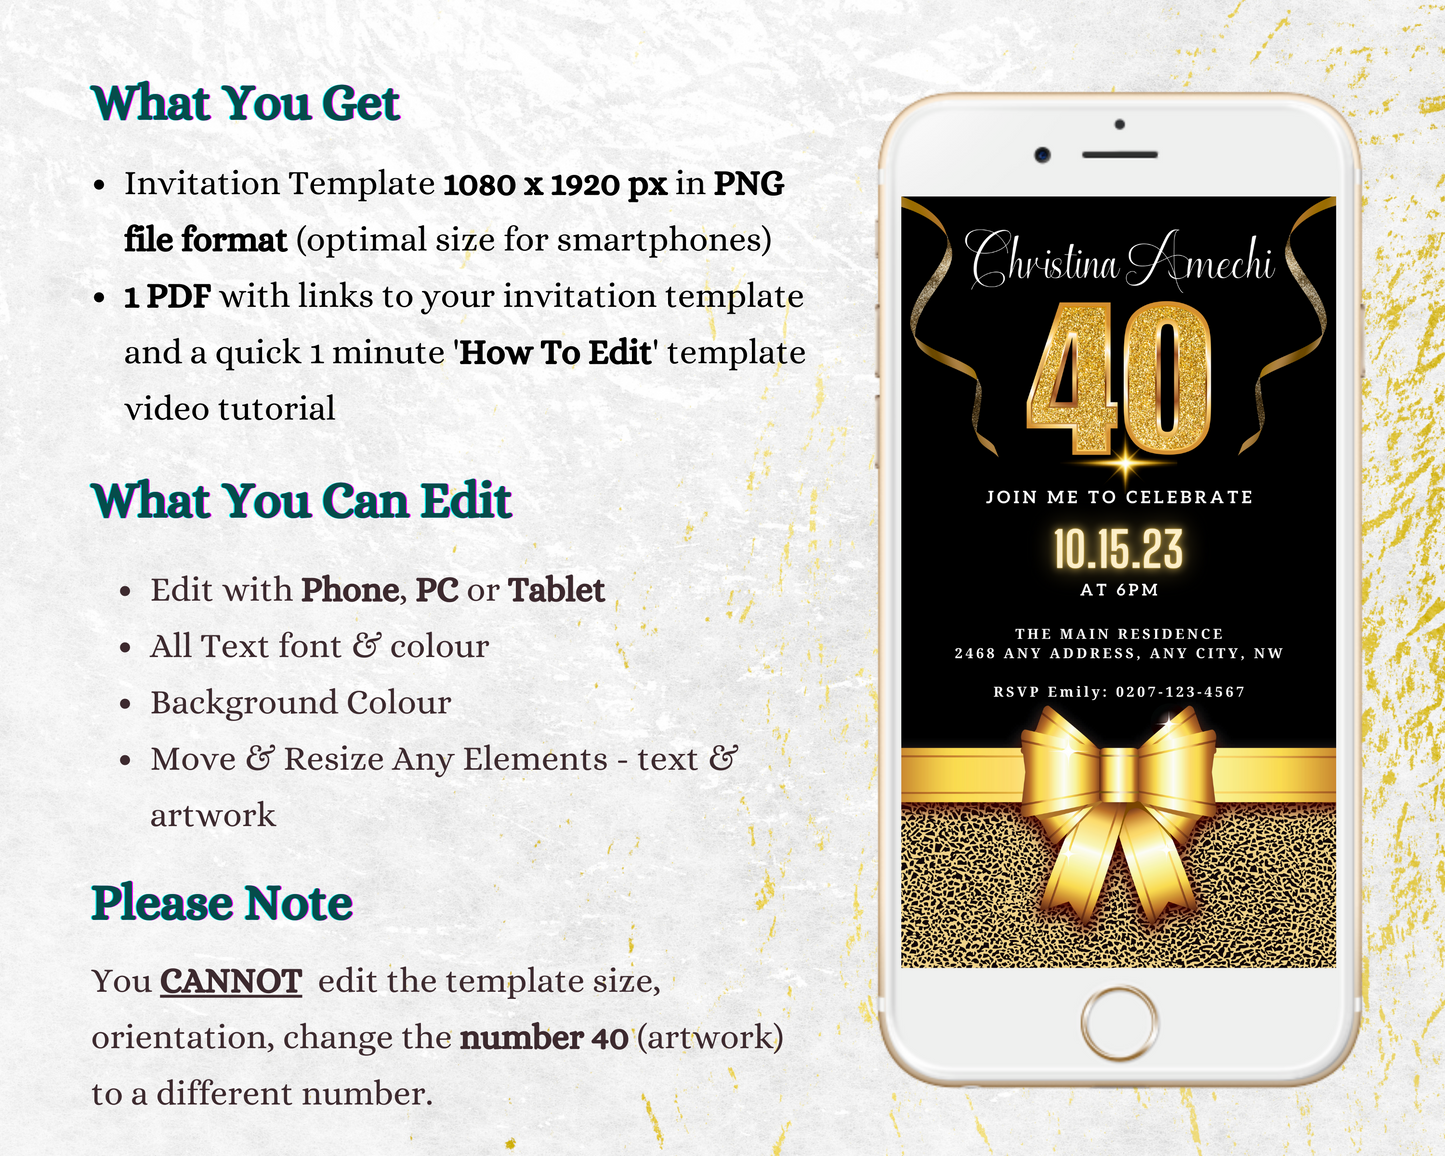 Cellphone displaying customizable Black Gold Leopard 40th Birthday Evite with gold bow, available for instant download and personalization via Canva.